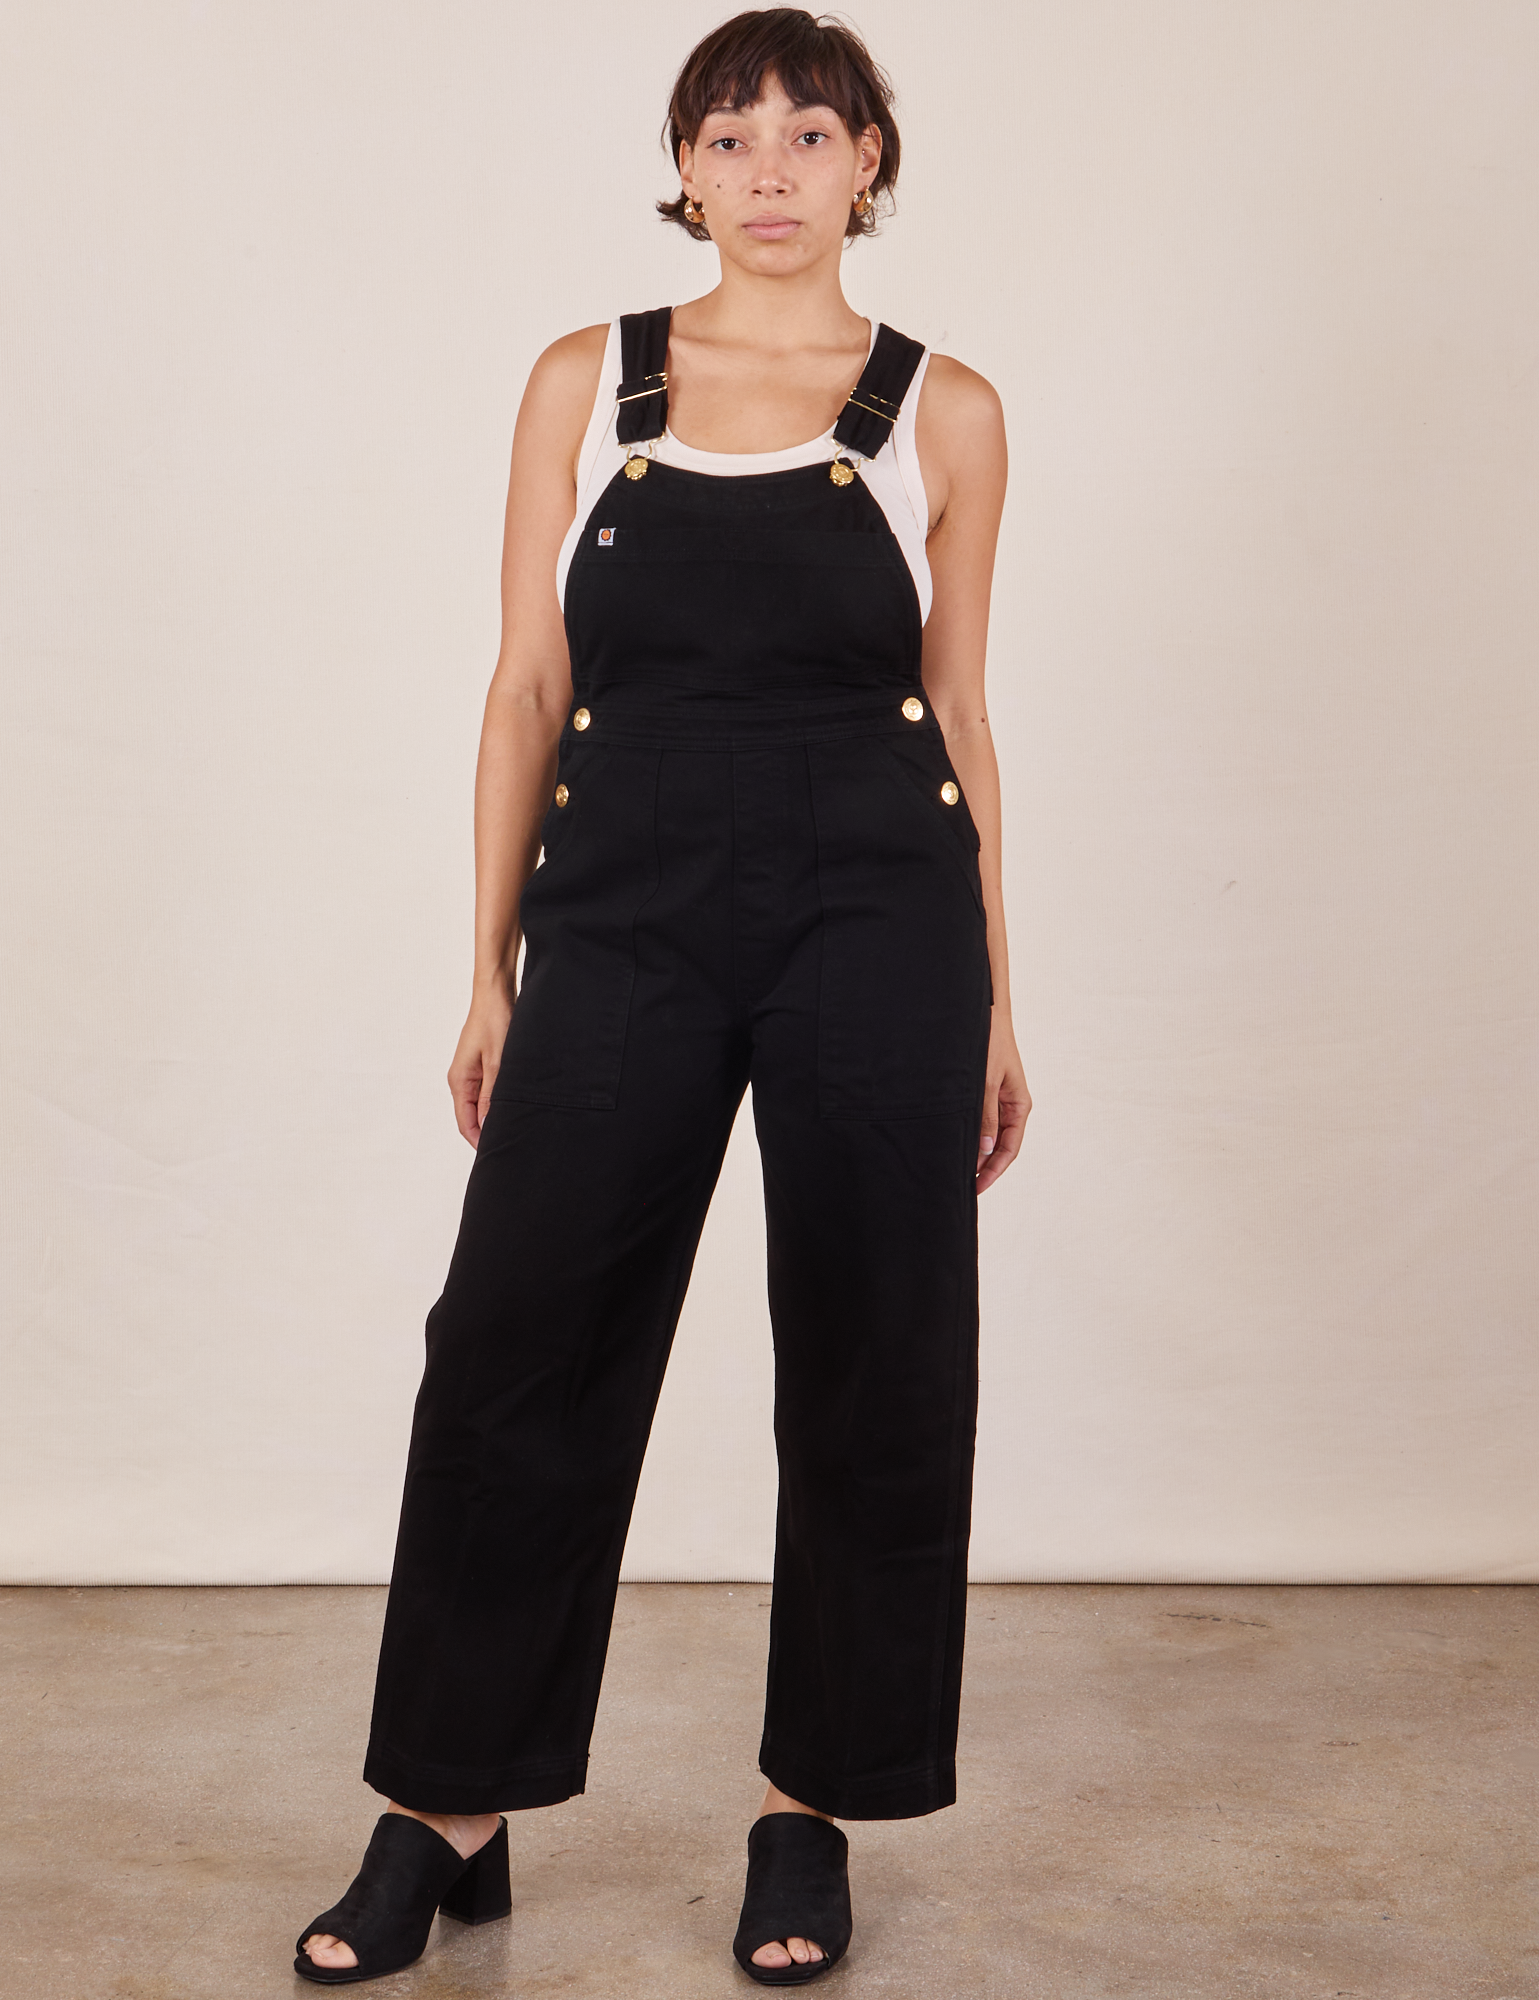 Tiara is 5&#39;4&quot; and wearing size XS Original Overalls in Mono Black with a Cropped Tank Top in vintage tee off-white  underneath.